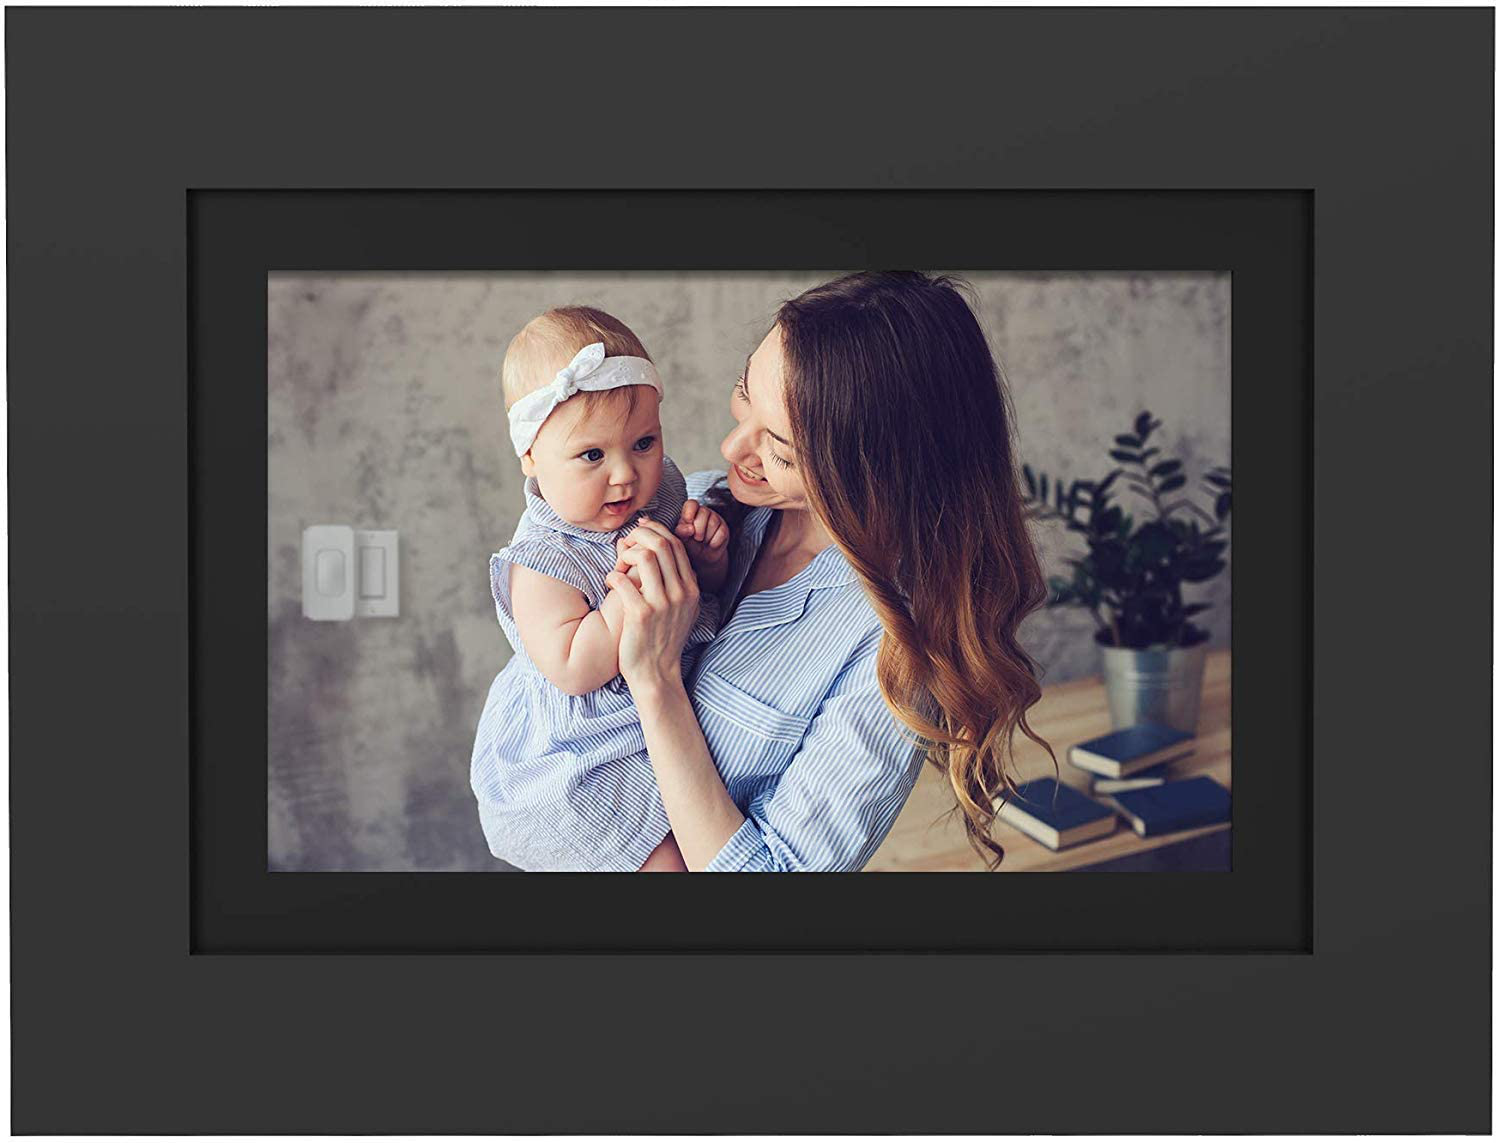 PhotoShare Friends and Family Smart Frame Digital Photo Frame, 1-5 Day Shipping, Send Pics from Phone to Frame, WiFi, 8 GB, Holds Over 5,000 Photos, HD, 1080P, iOS, Android